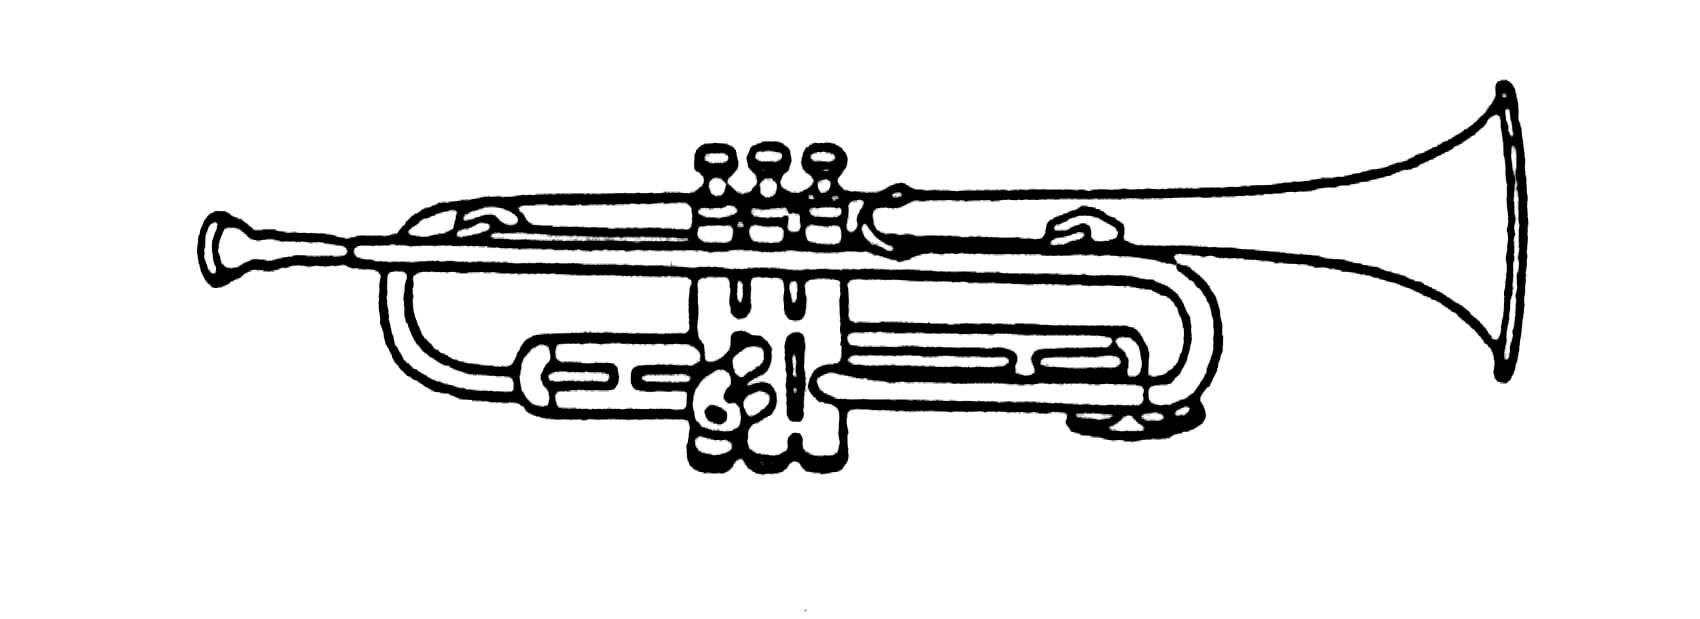 Trombone Drawing Free Cliparts That You Can Download To You Computer